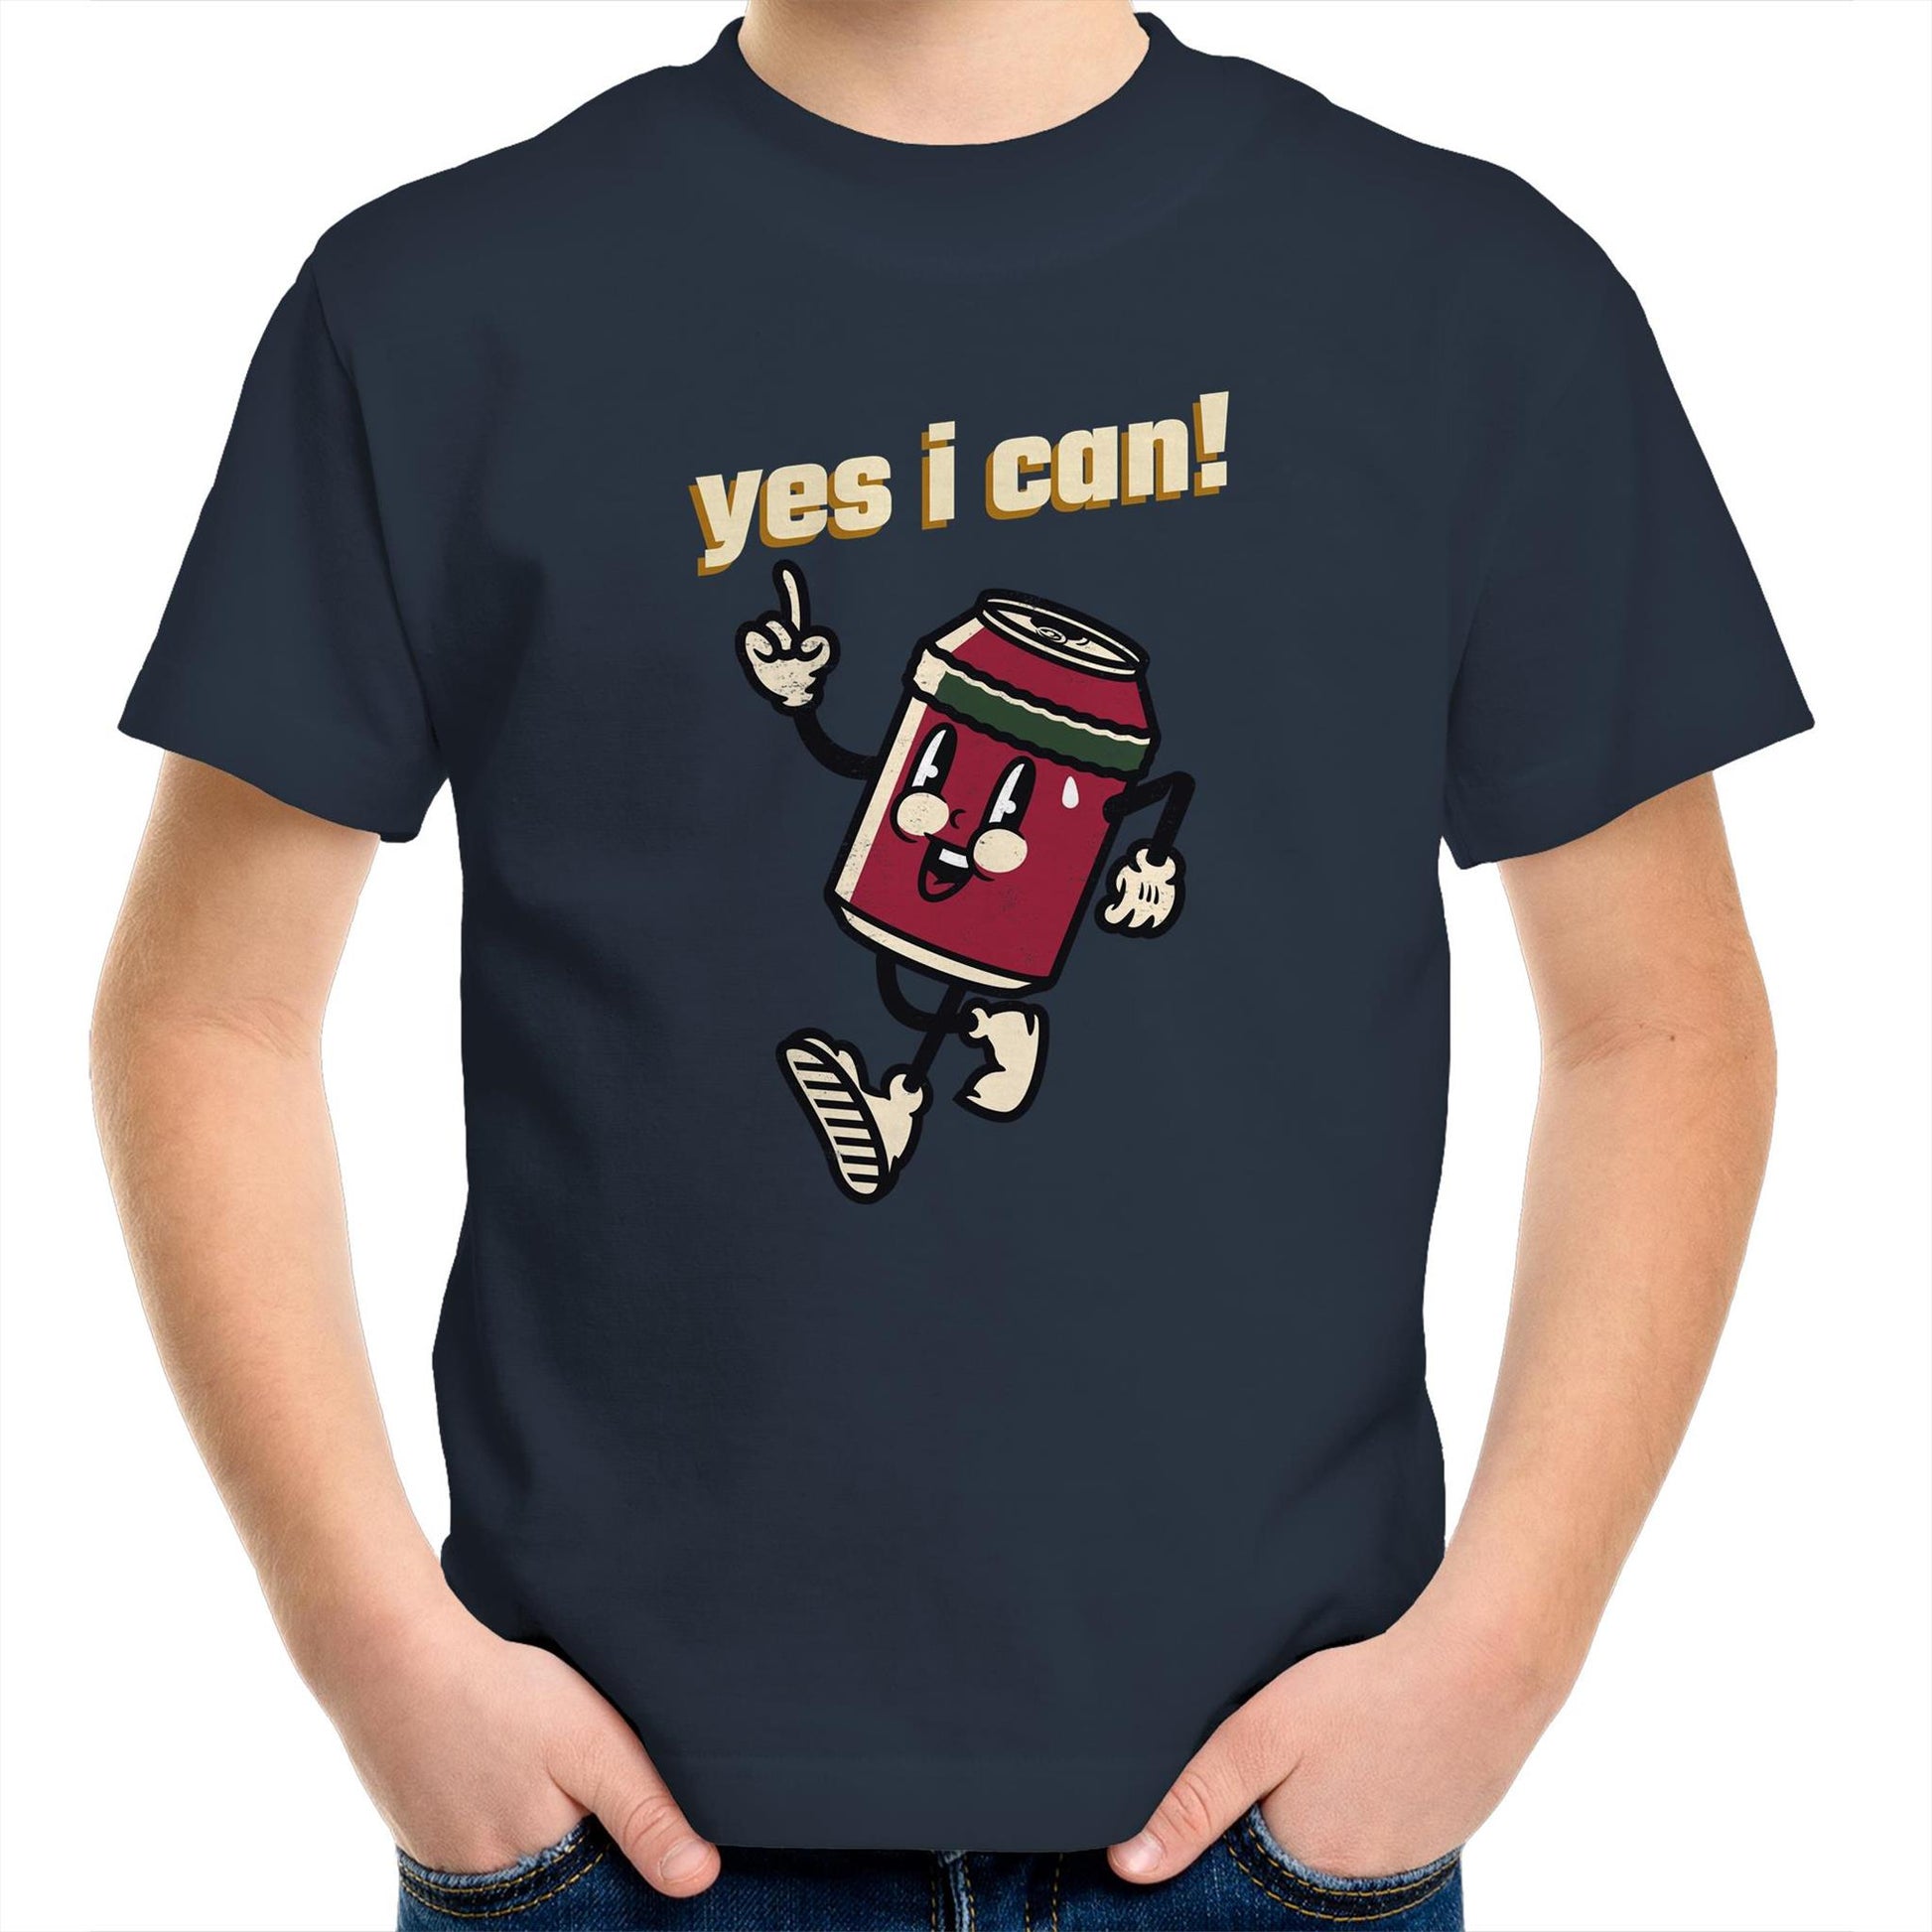 Yes I Can! - Kids Youth Crew T-Shirt Navy Kids Youth T-shirt Motivation Retro